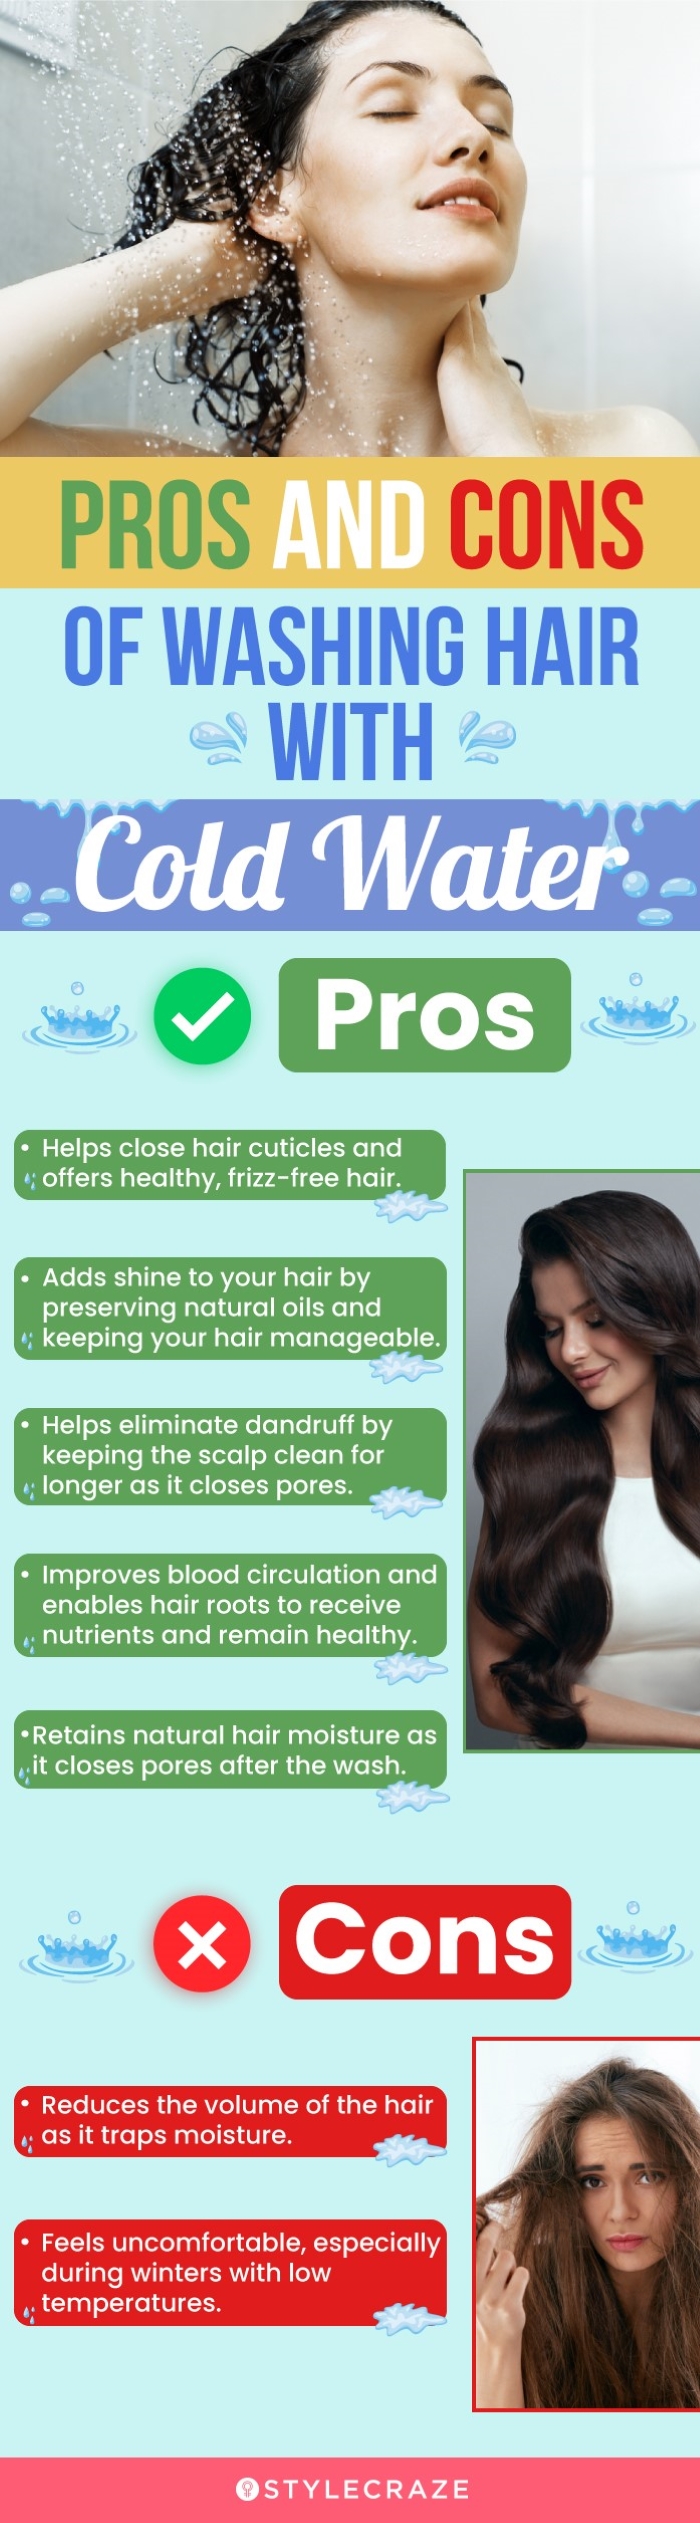 pros and cons of washing hair with cold water (infographic)